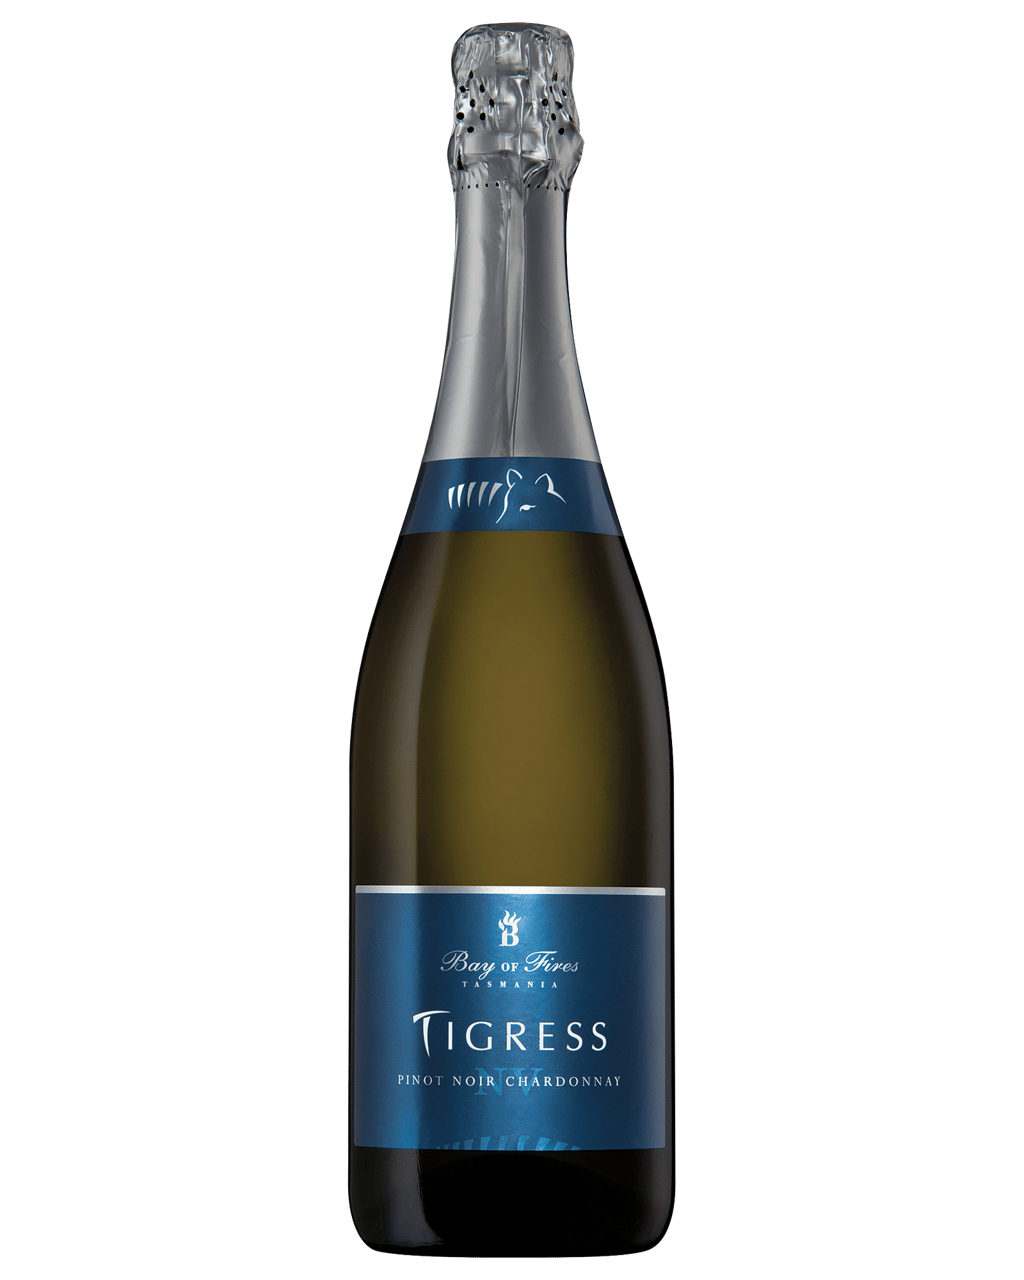 Bay Of Fires Tigress Pinot Noir Chardonnay Unbeatable Prices Buy Online Best Deals With